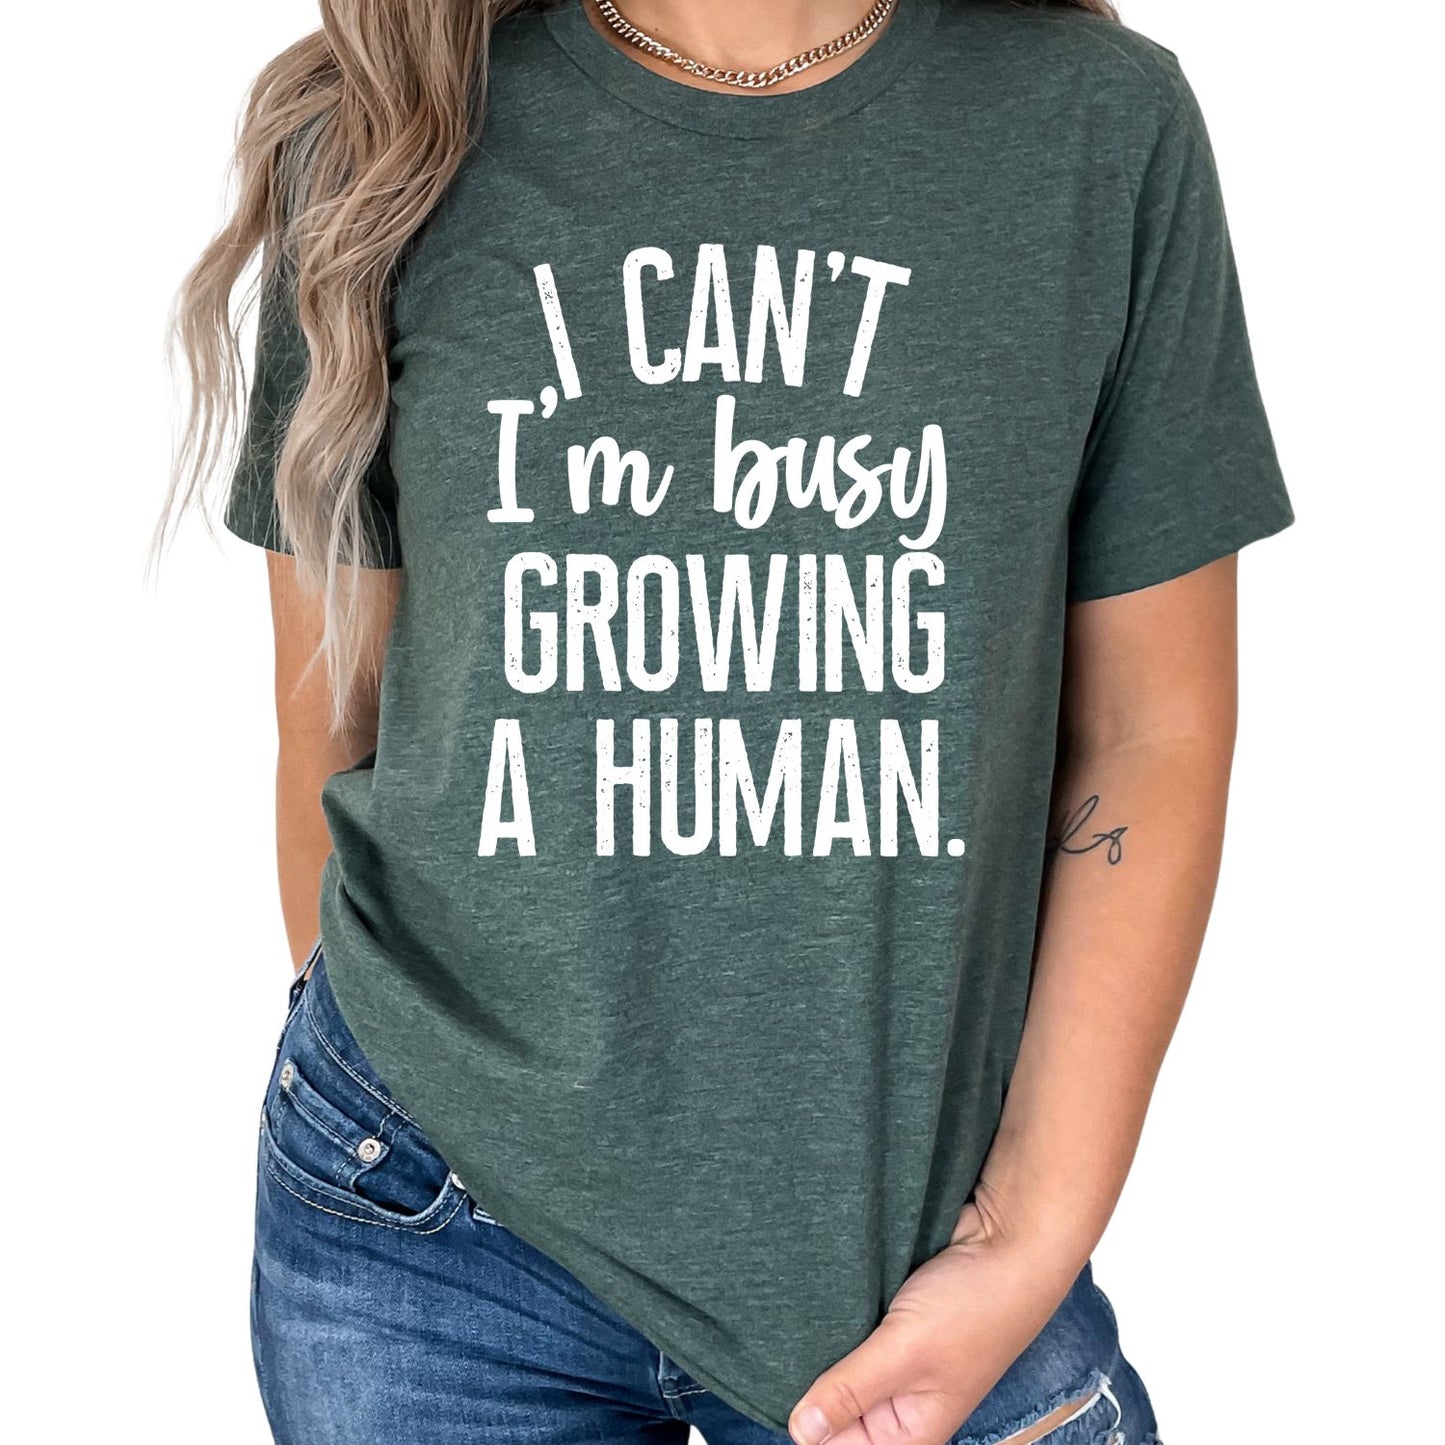 I Can't I'm Busy Growing a Human